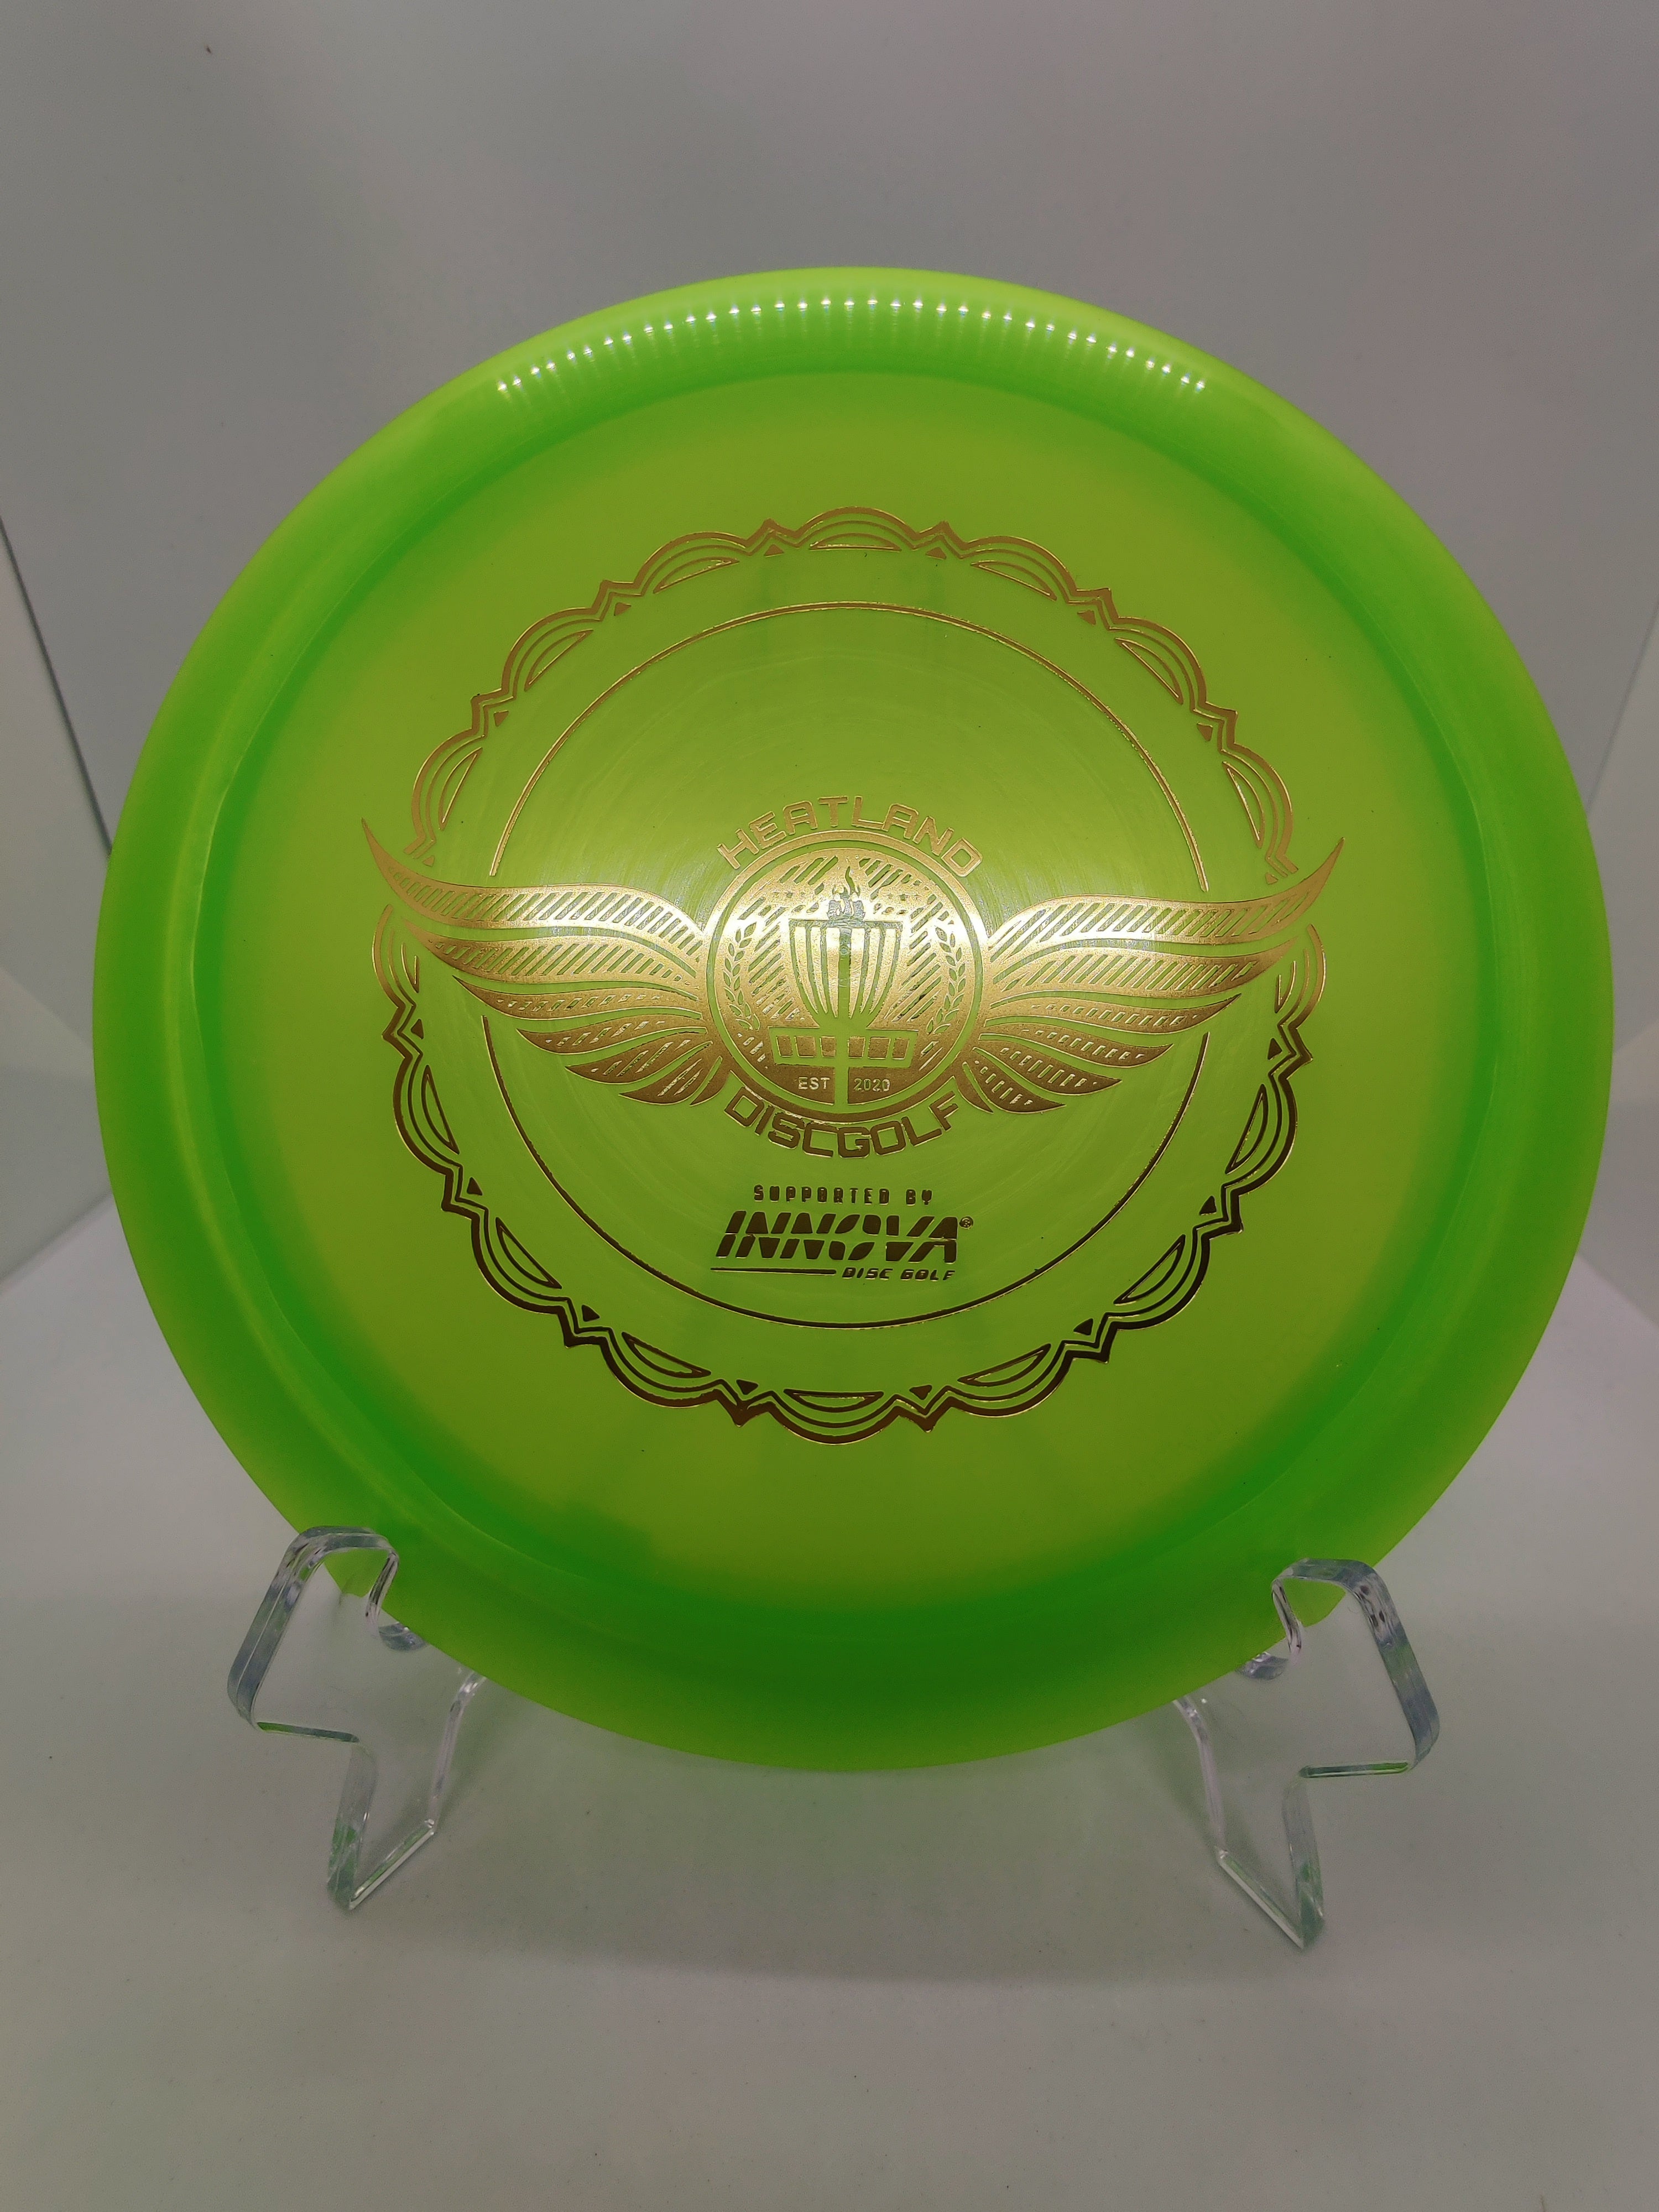 Luster Champion Wraith Heatland Discgolf special edition